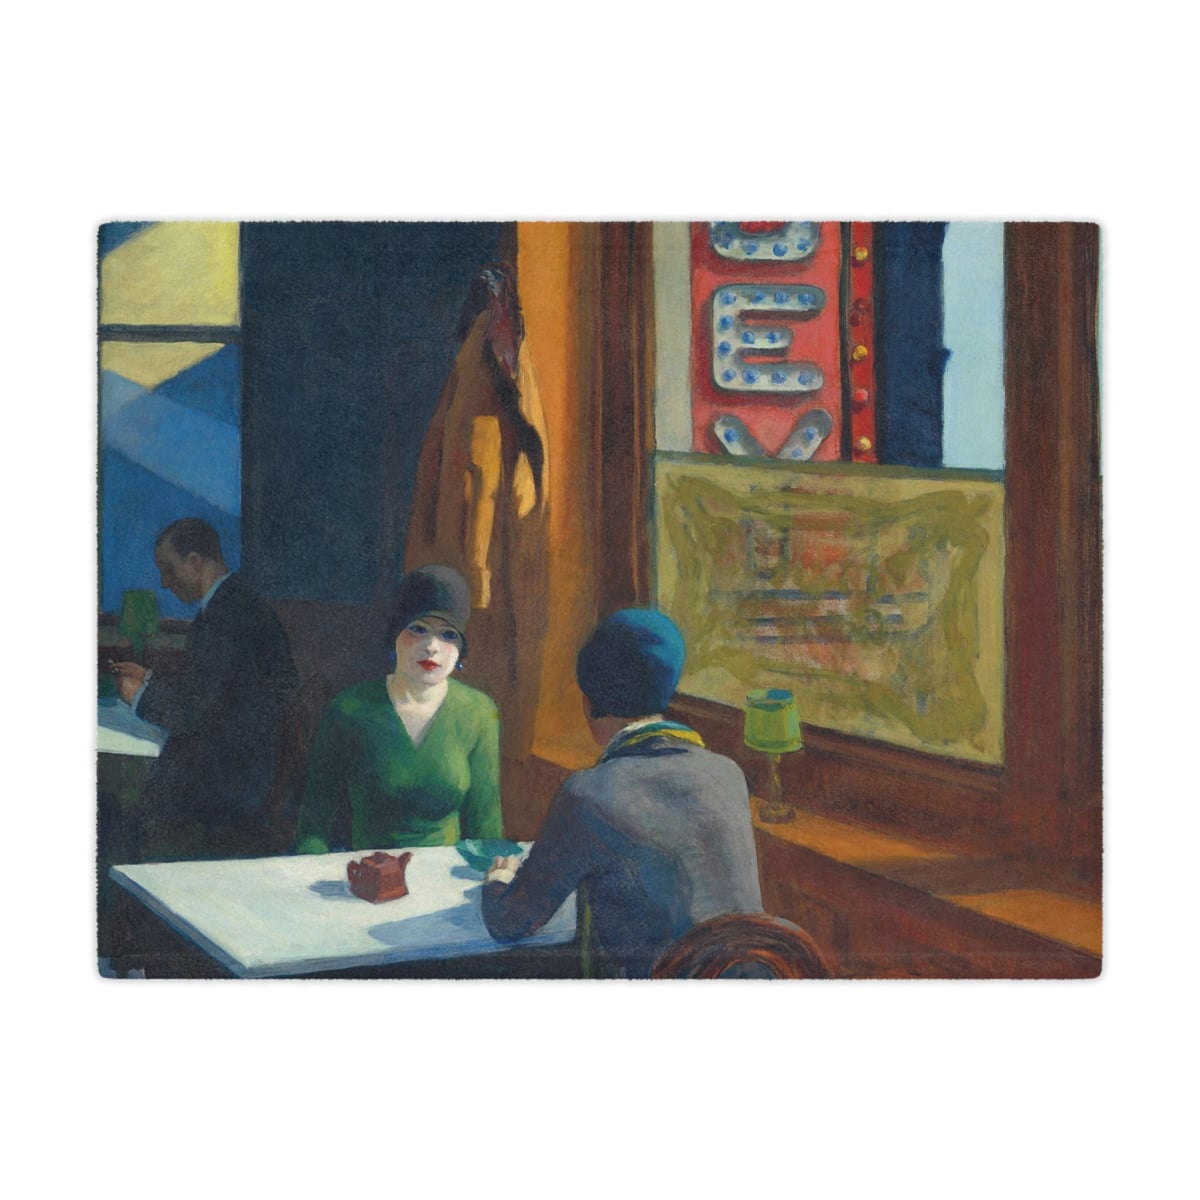 Wrap up in artistry with Edward Hopper's iconic 'Chop Suey' on this blanket